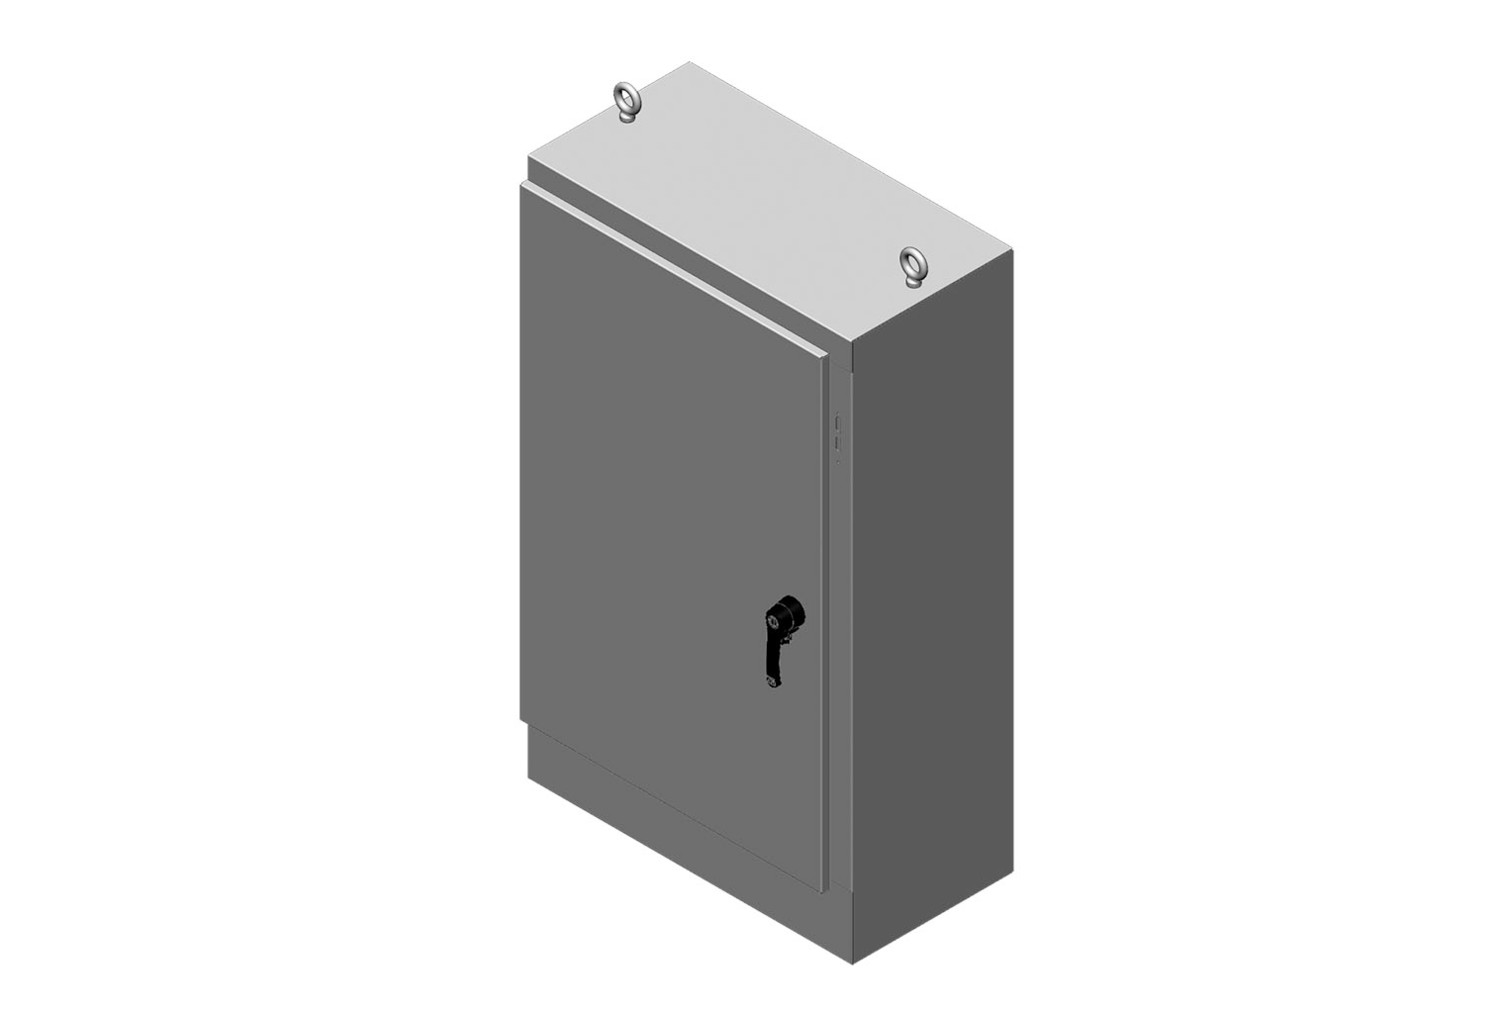 RMR Free-Standing Disconnect Enclosure, Type 4, with Solid Single Door - Image 4